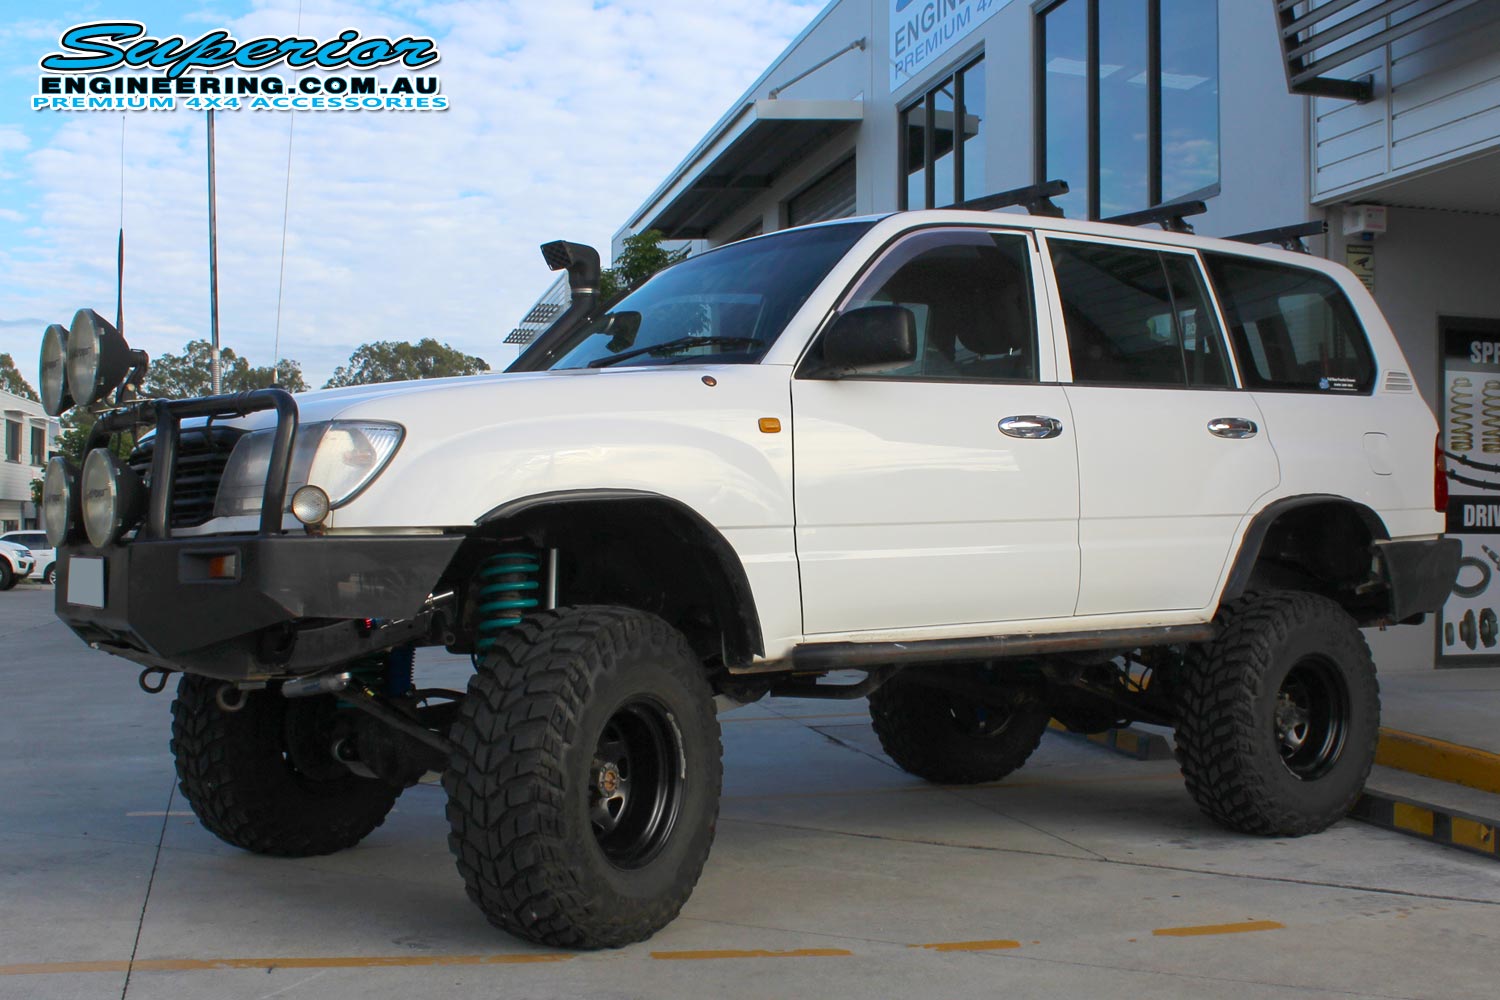 Left side view of a white 105 Series Toyota Landcruiser 4wd fitted with the huge 6 inch lift kit by Superior Engineering